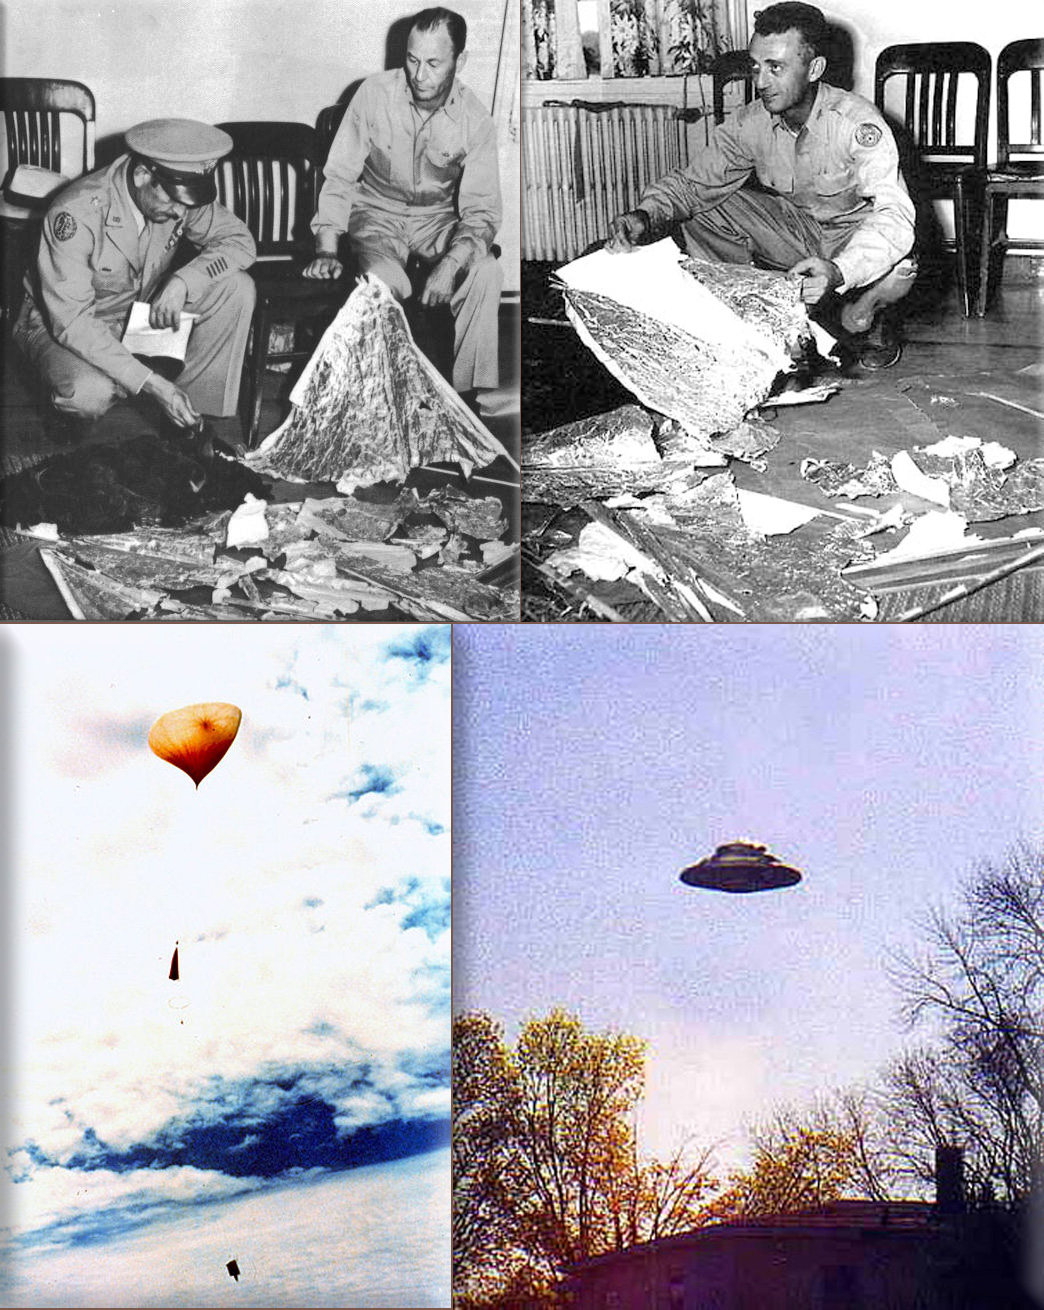 Roswell UFO incident, credit alien-ufo-research; A NOAA weather balloon just after launch; UFO unexplained